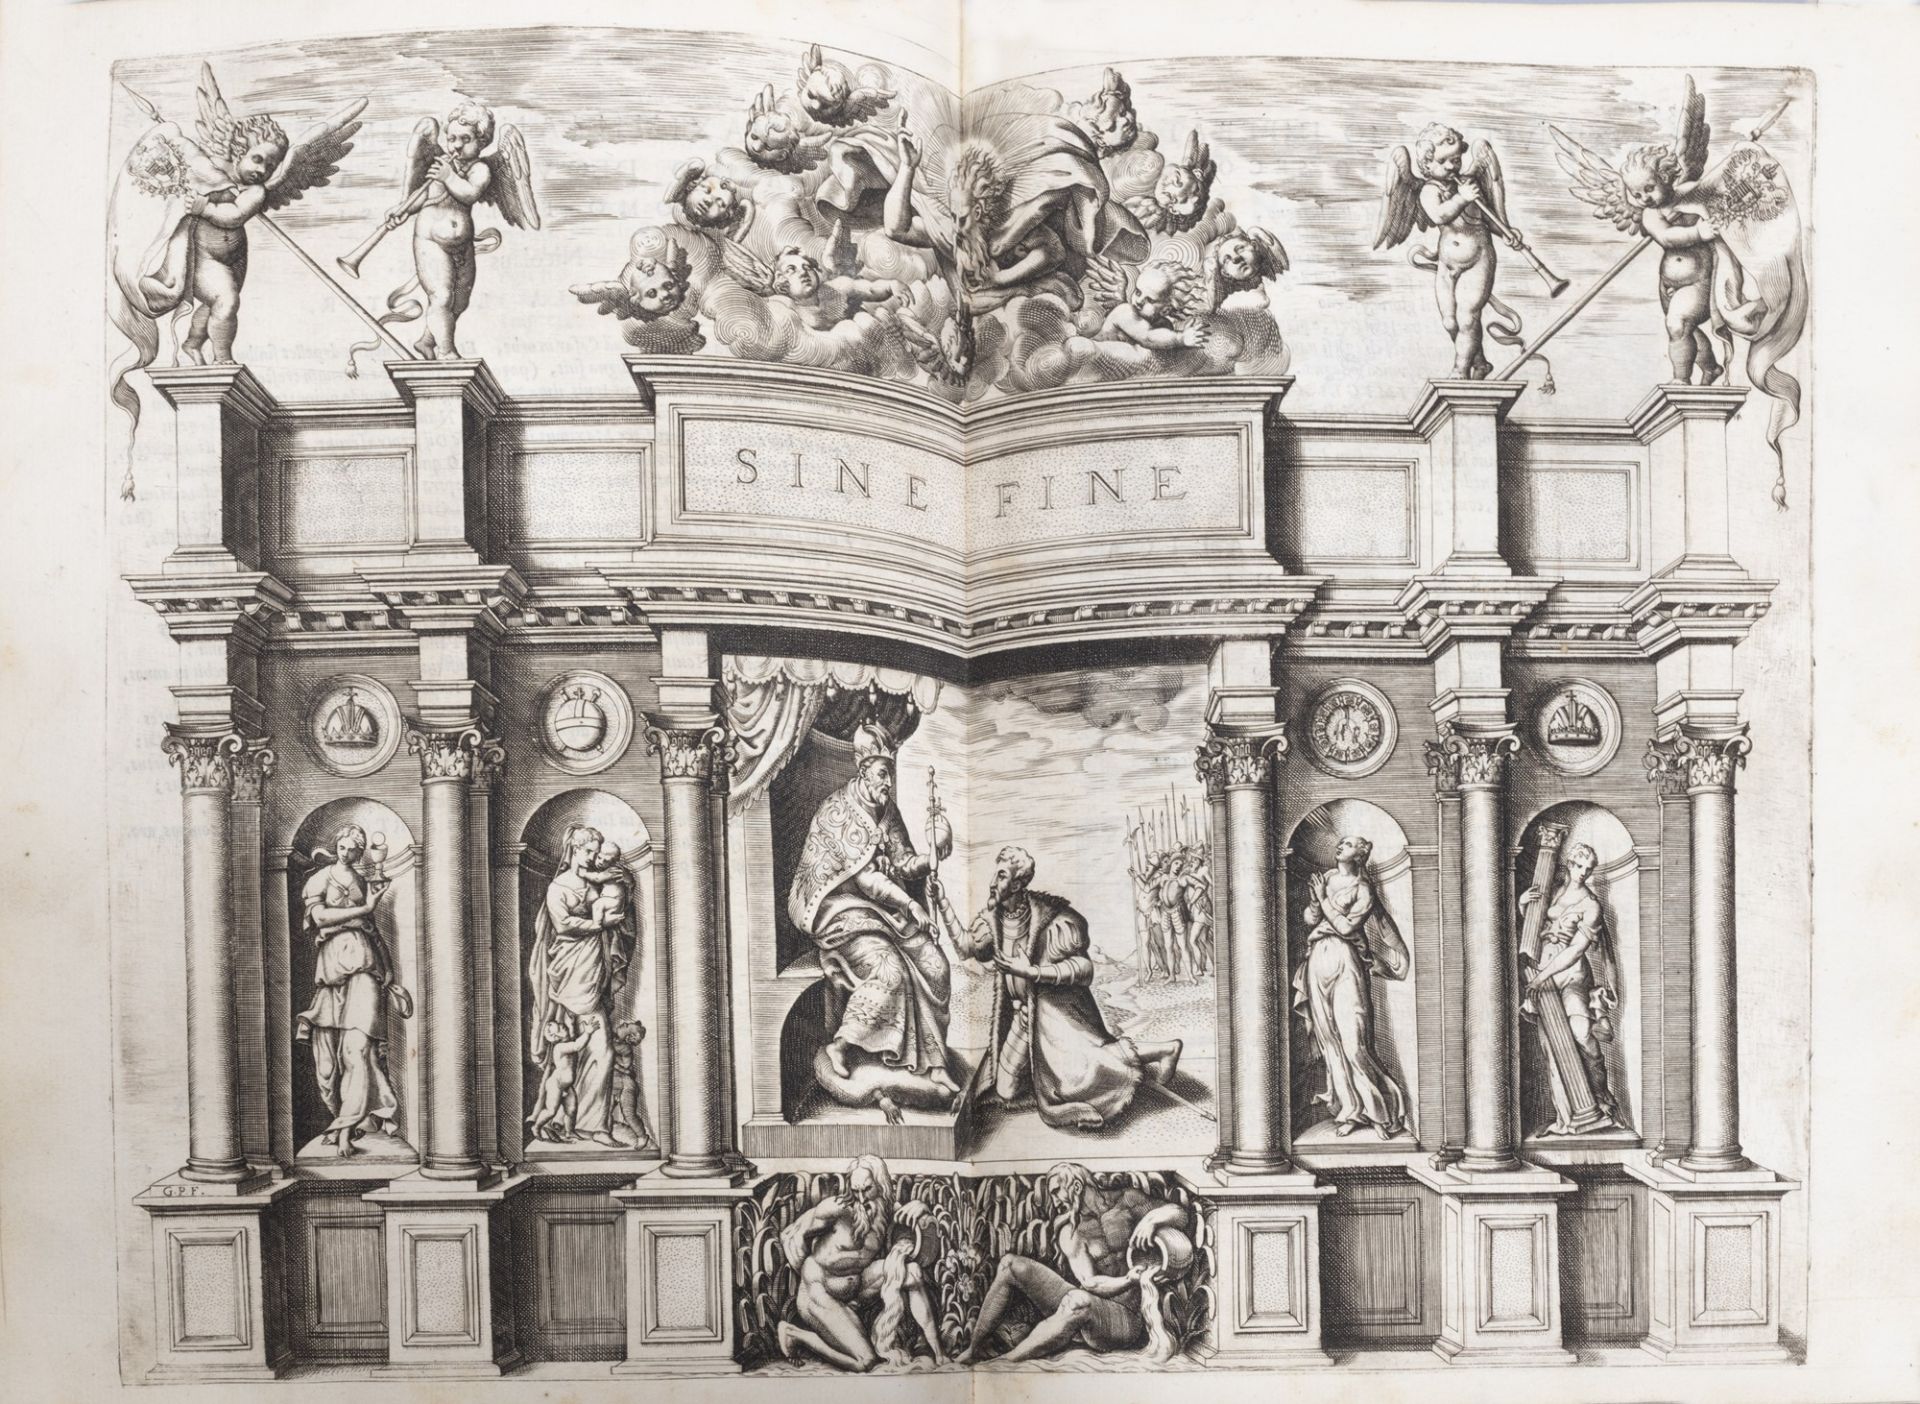 Emblemata - Ruscelli, Girolamo - Illustrious companies with exhibitions, and speeches by S.or Ieroni - Image 4 of 5